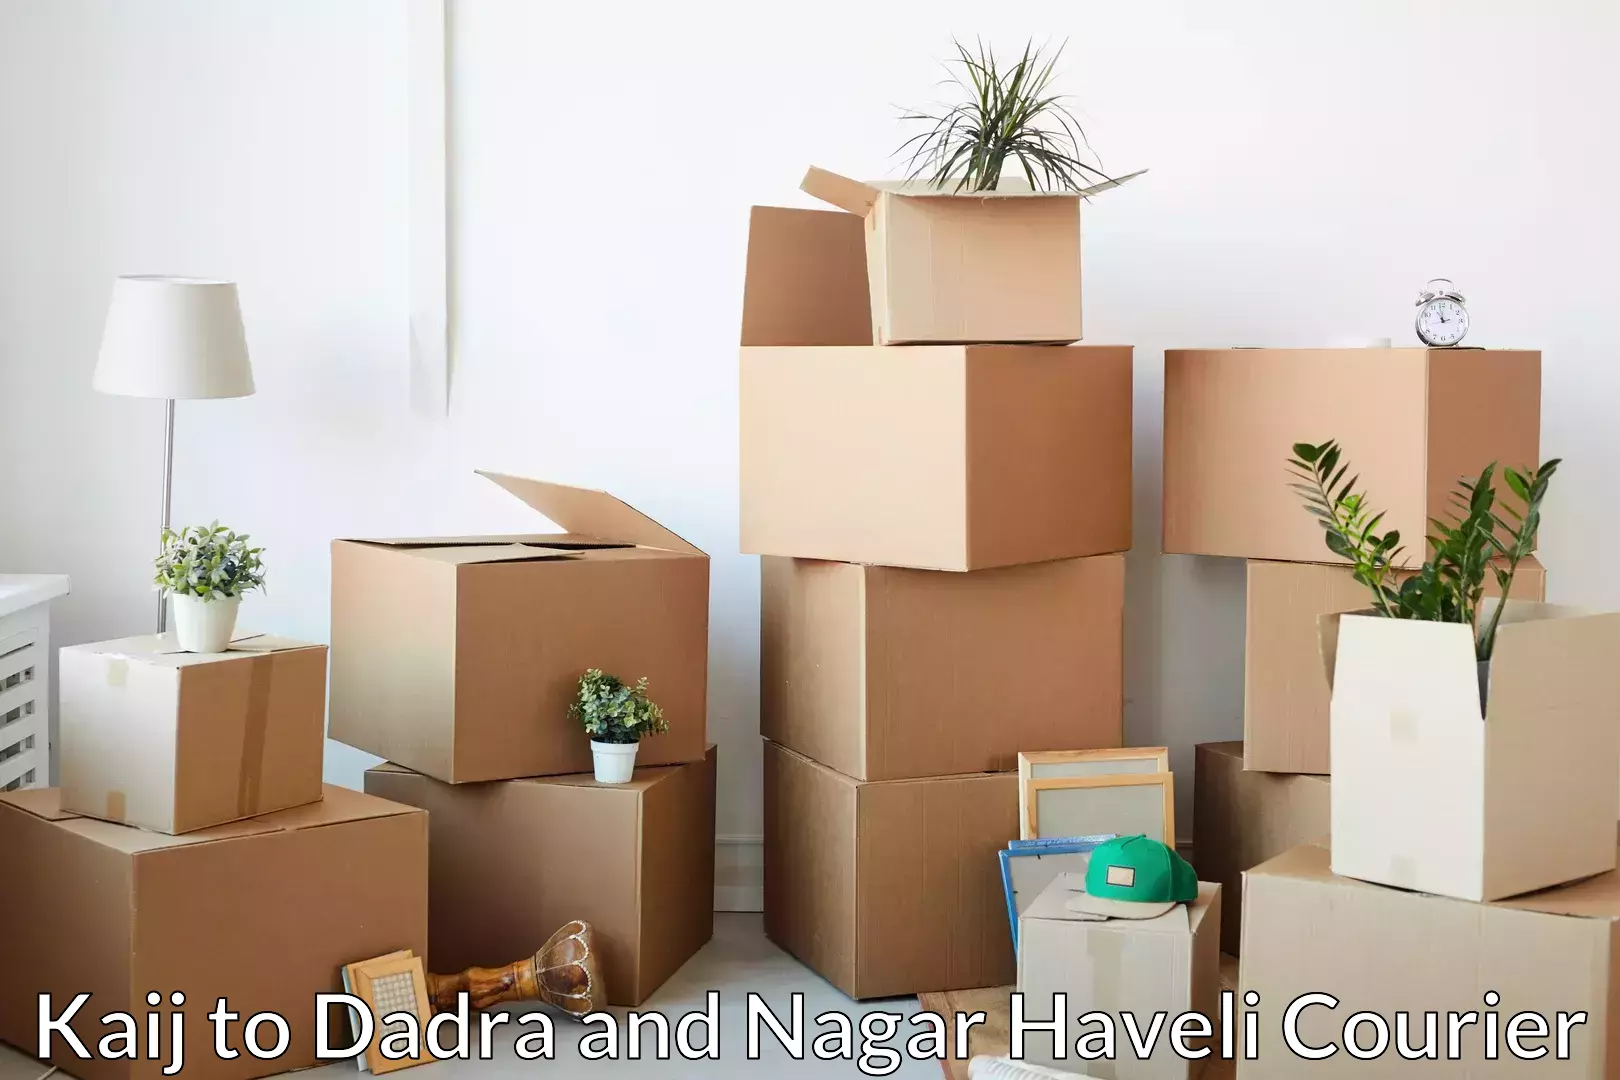 Professional movers and packers Kaij to Silvassa